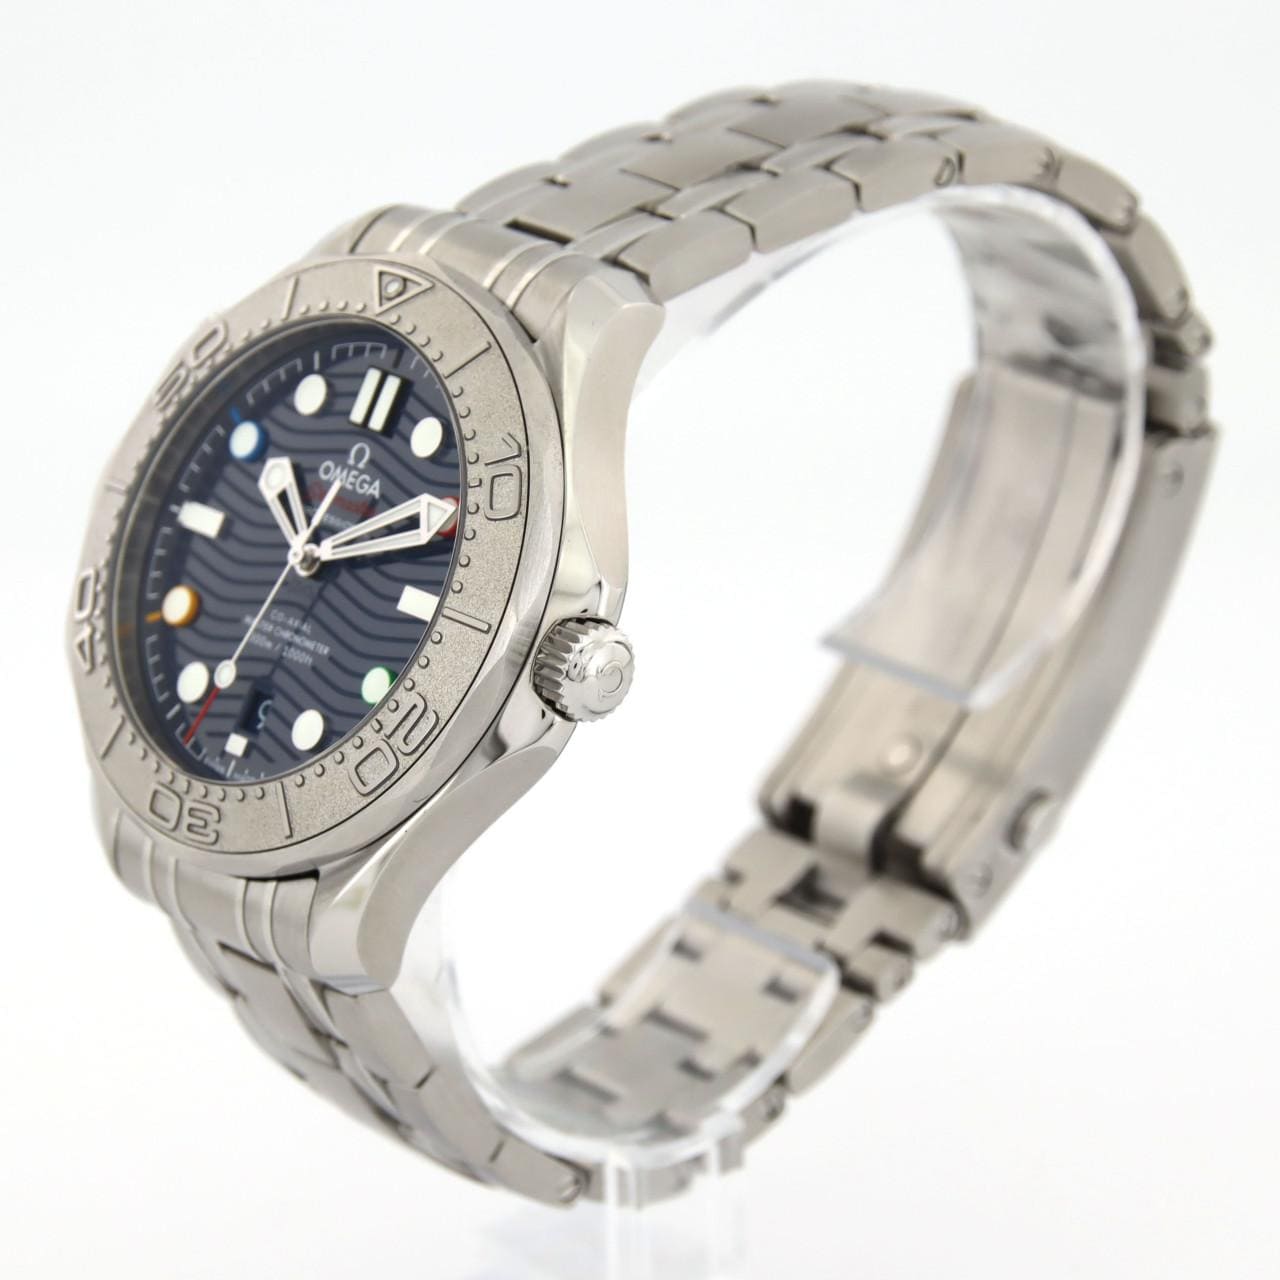 Omega Seamaster Diver 300M Beijing 2022 522.30.42.20.03.001 SS Automatic